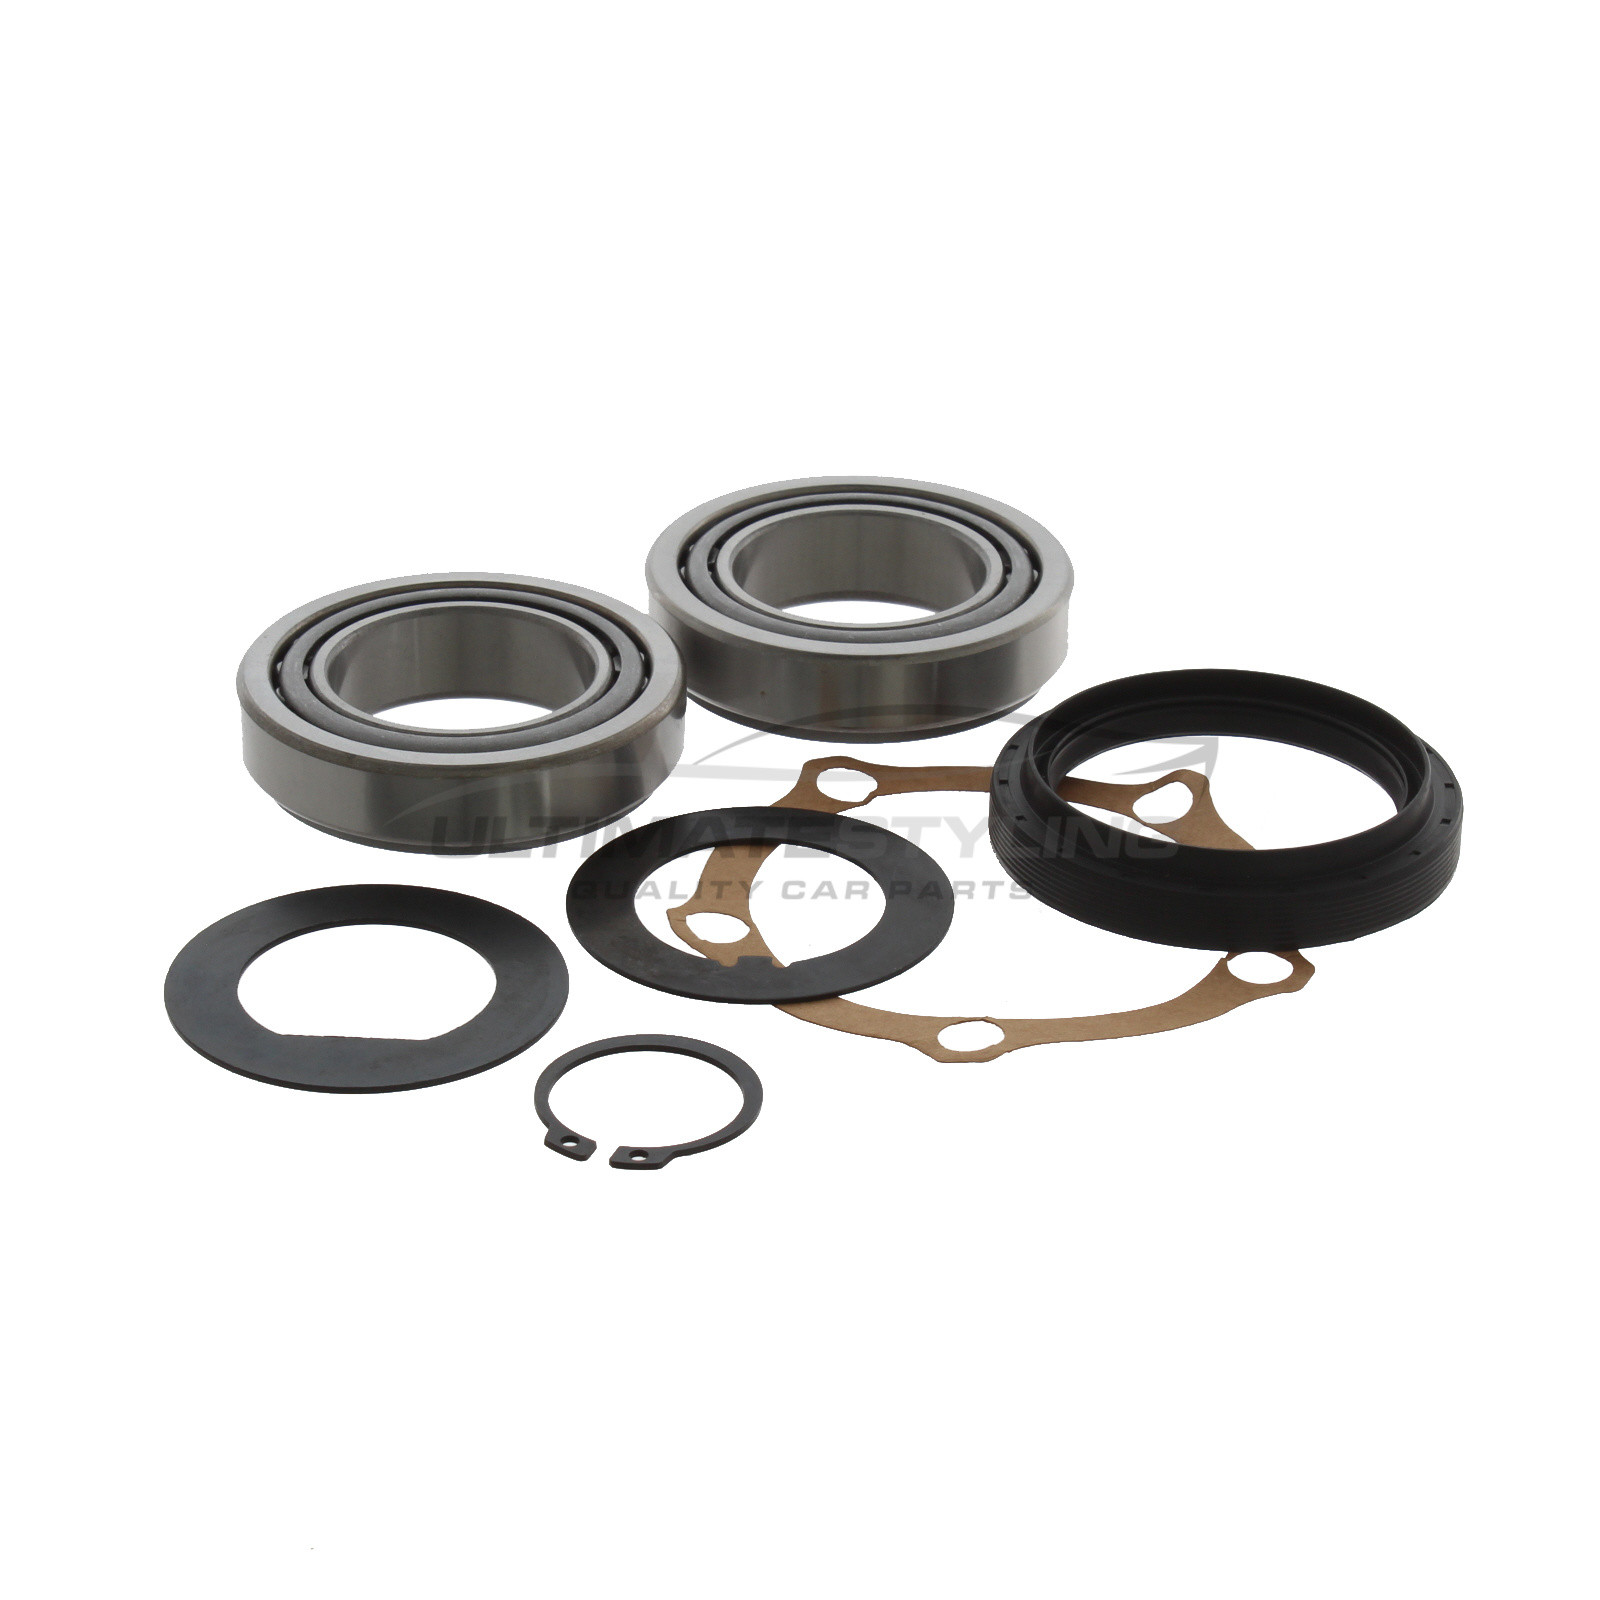 Front <span style="color:red;"><strong>OR</strong></span> Rear Wheel Bearing Kit for Land Rover Range Rover